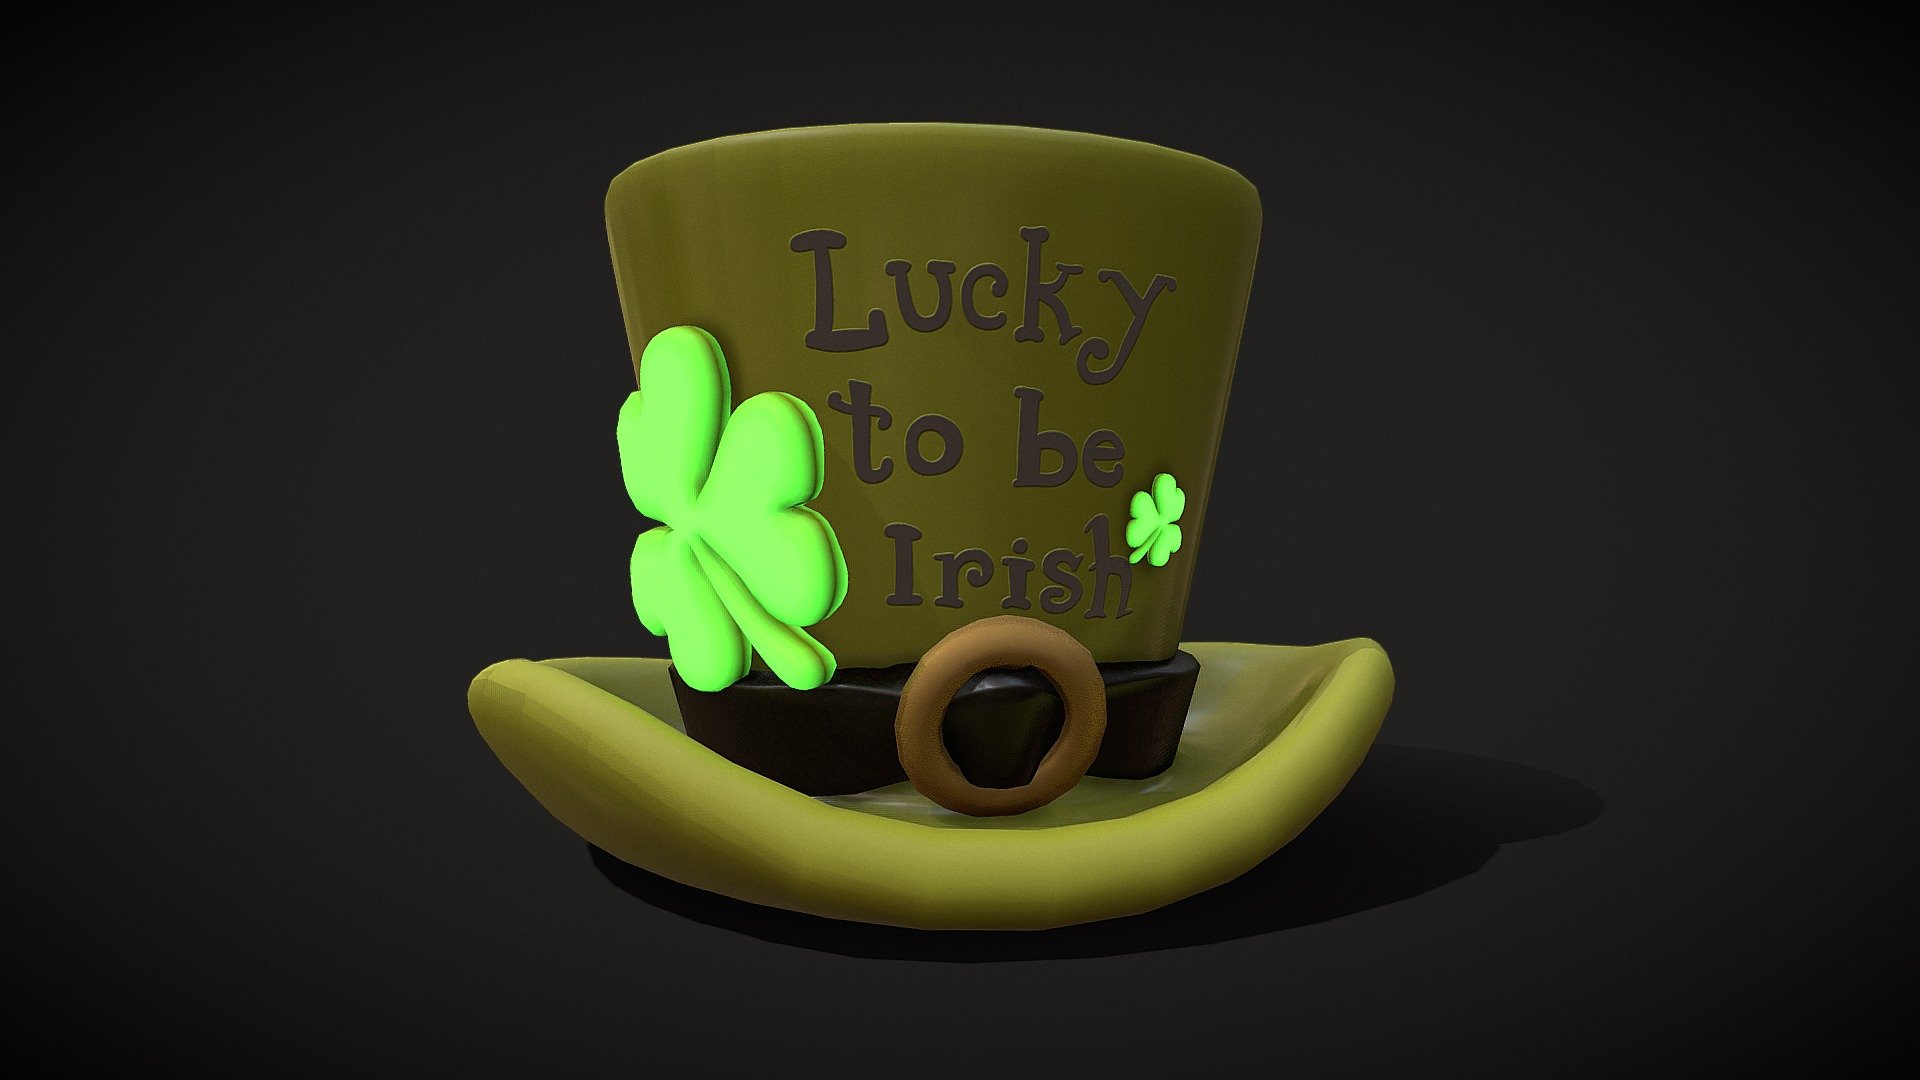 Lucky_To_Be_Irish_Hat_FBX
VR / AR / Low-poly
PBR : approved
Geometry: Polygon mesh
Polygons: 4,316
Vertices: 4,320
Textures : 4K - Lucky_To_Be_Irish_Hat - Buy Royalty Free 3D model by GetDeadEntertainment 3d model